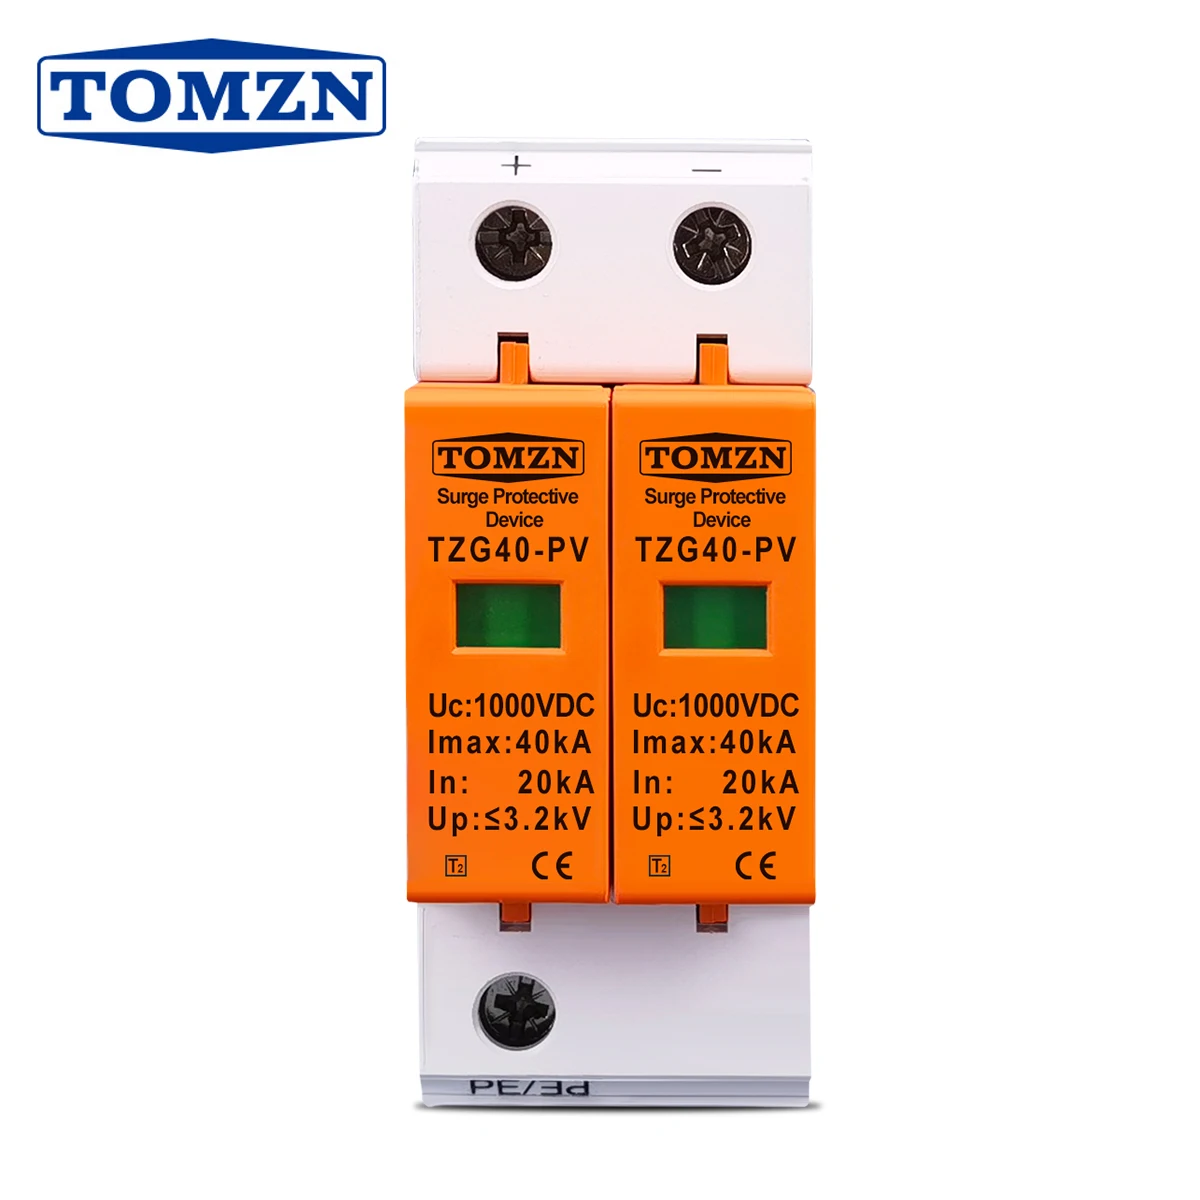 SPD DC 1000V 20KA~40KA House Surge Protector Protective Low-voltage Arrester Device surge protective device excellent practical easy installation for camera surge arrester thunder arrester